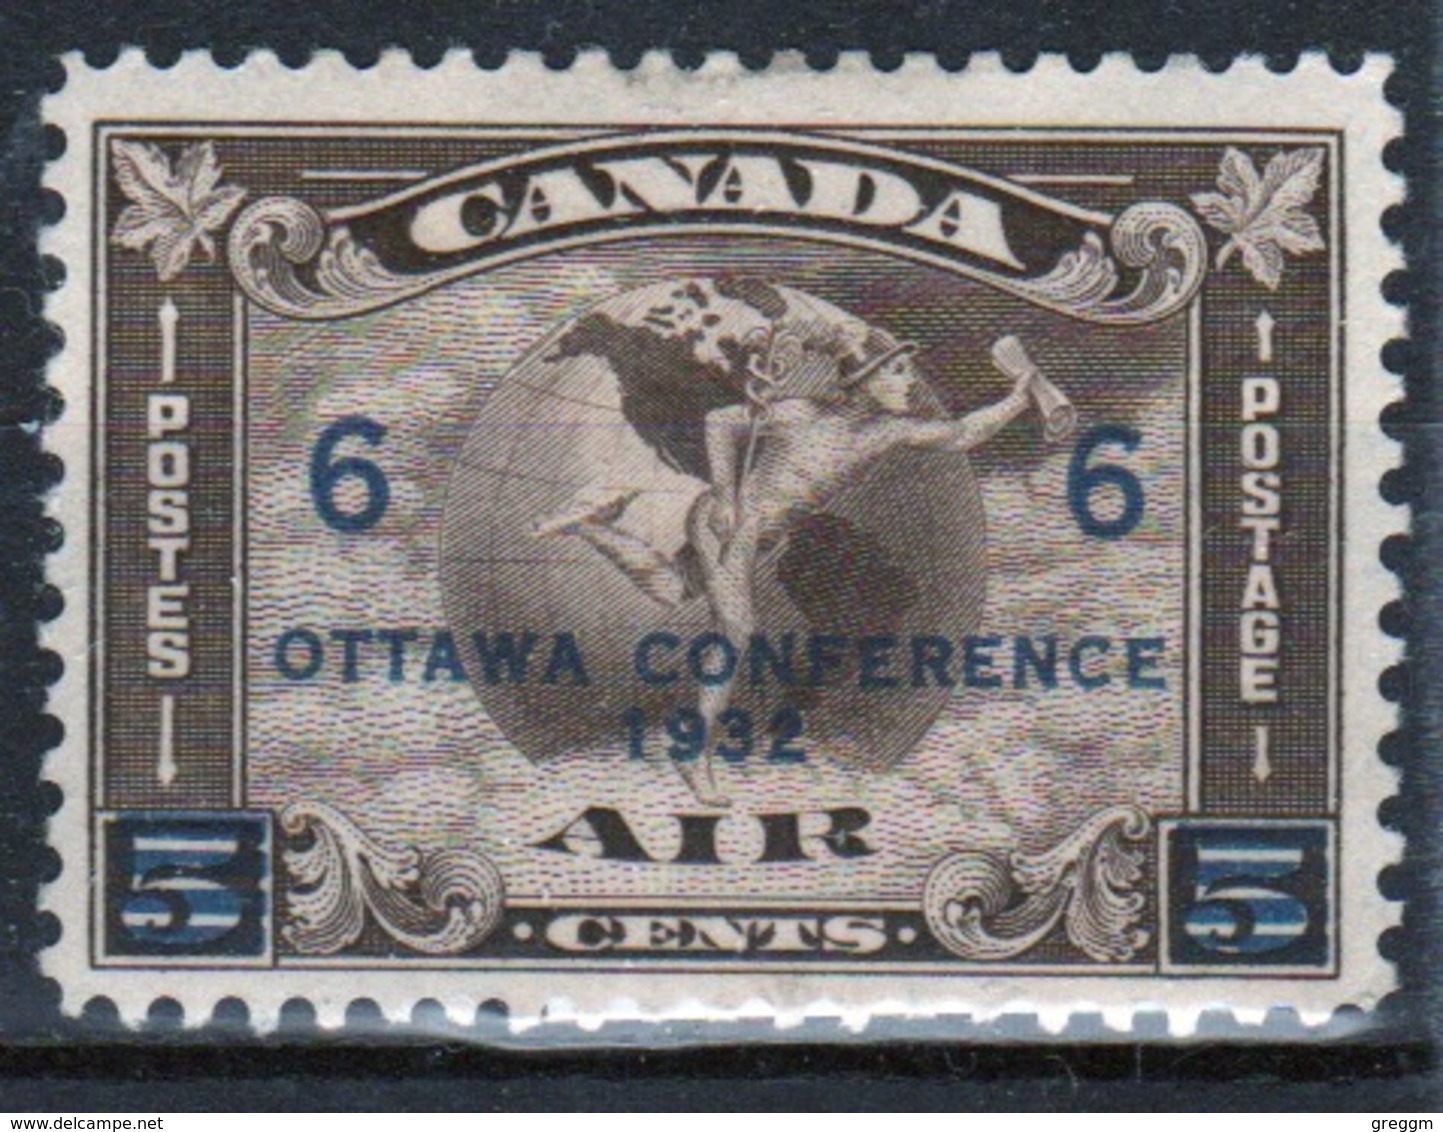 Canada 1934 Single 5 Cent Stamp To Celebrate The Ottawa Conference With 6c Overprint. - Nuovi